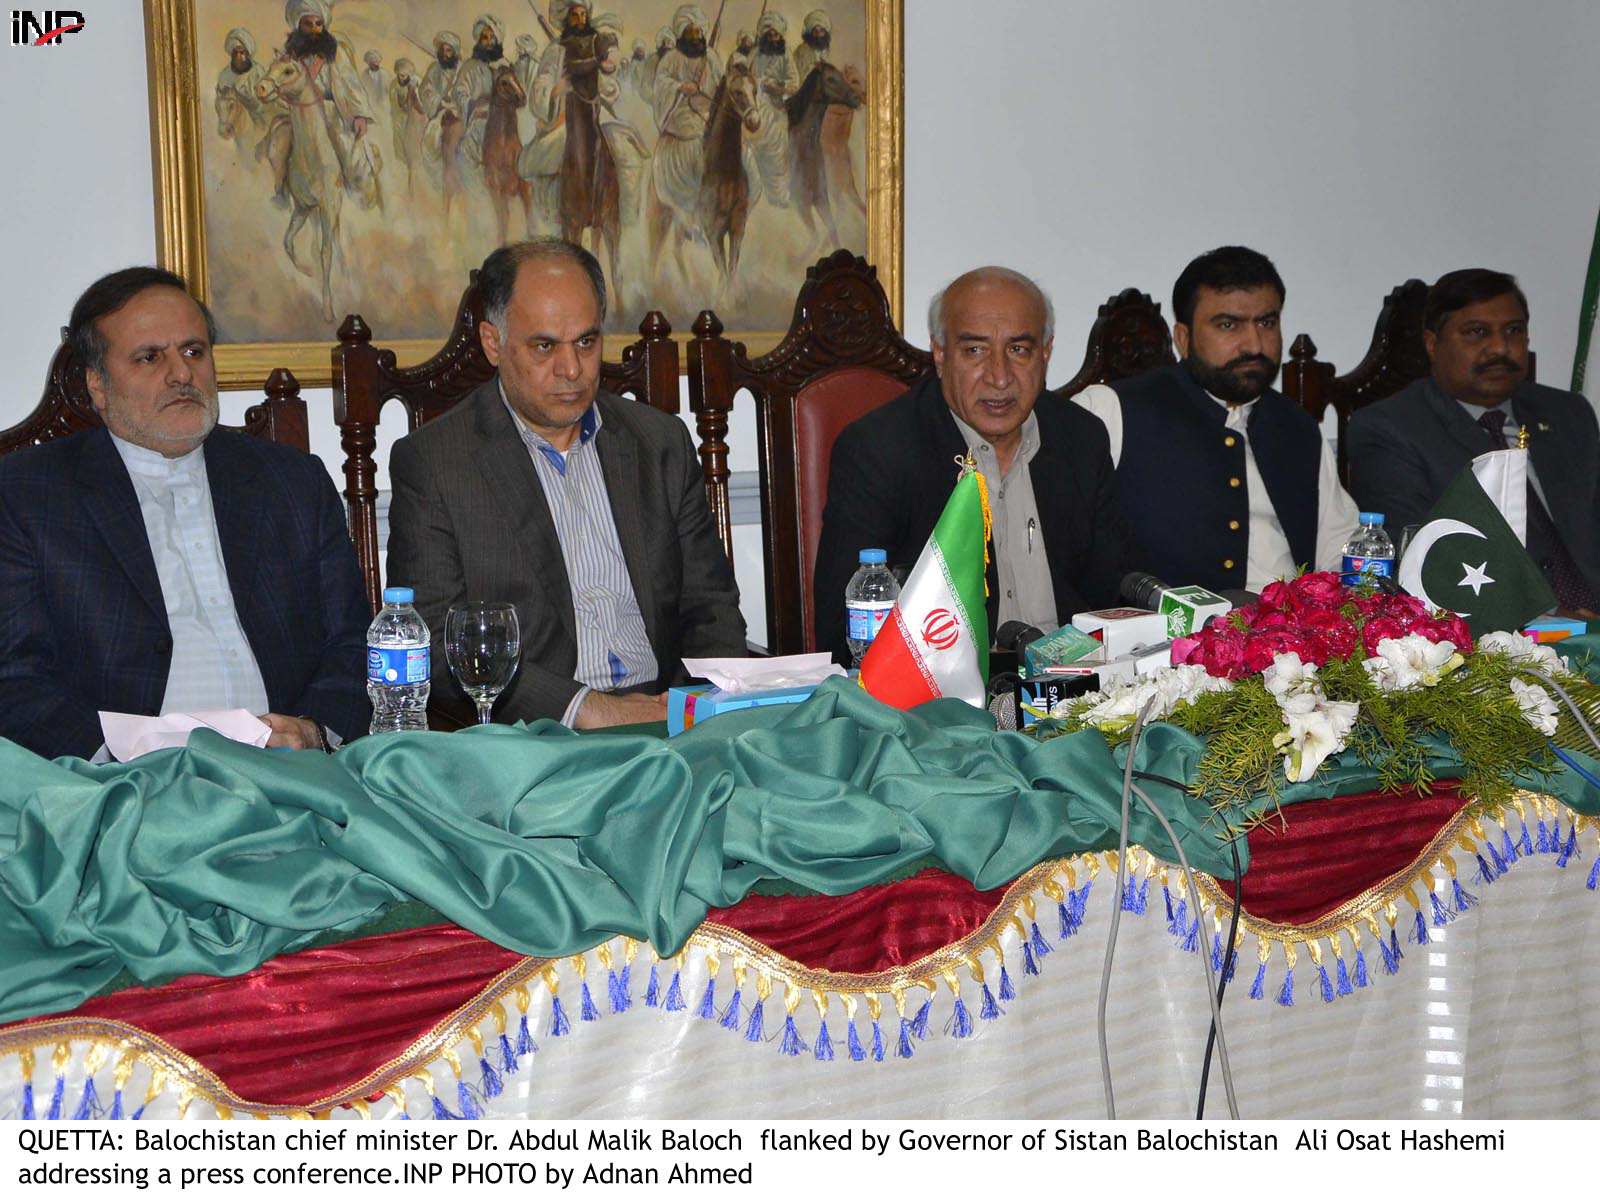 sistan baluchistan governor ali osat hashemi 2nd l and balochistan chief minister abdul malik baloch 2nd r addressing a joint press conference in quetta on sunday photo inp